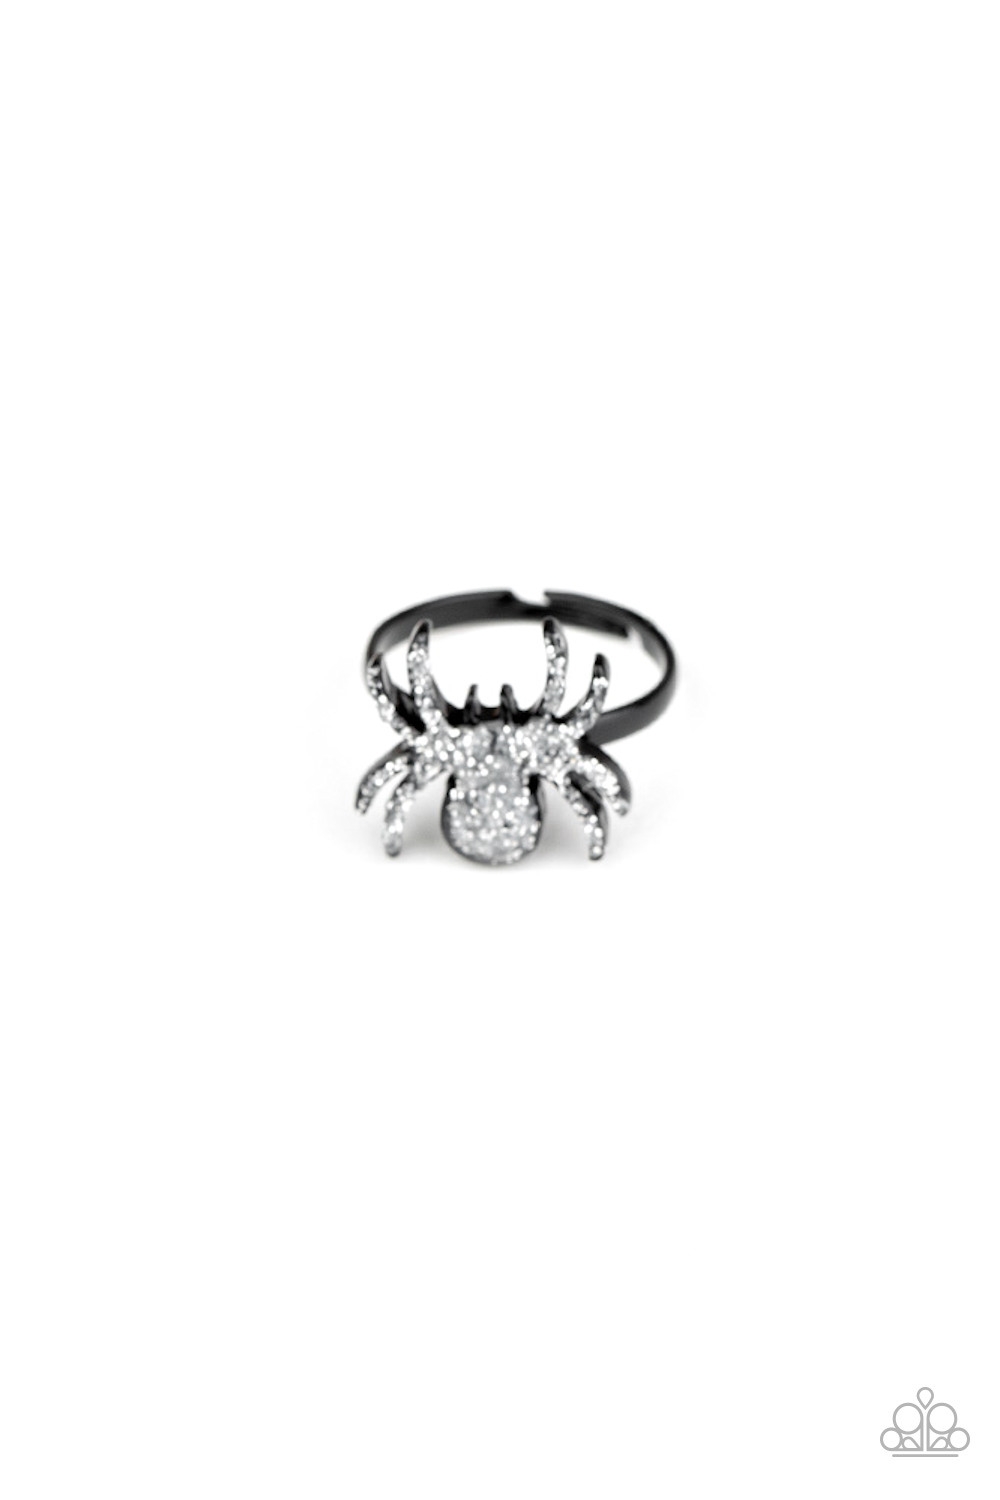 Ring - Starlet Shimmer Spiders - Silver